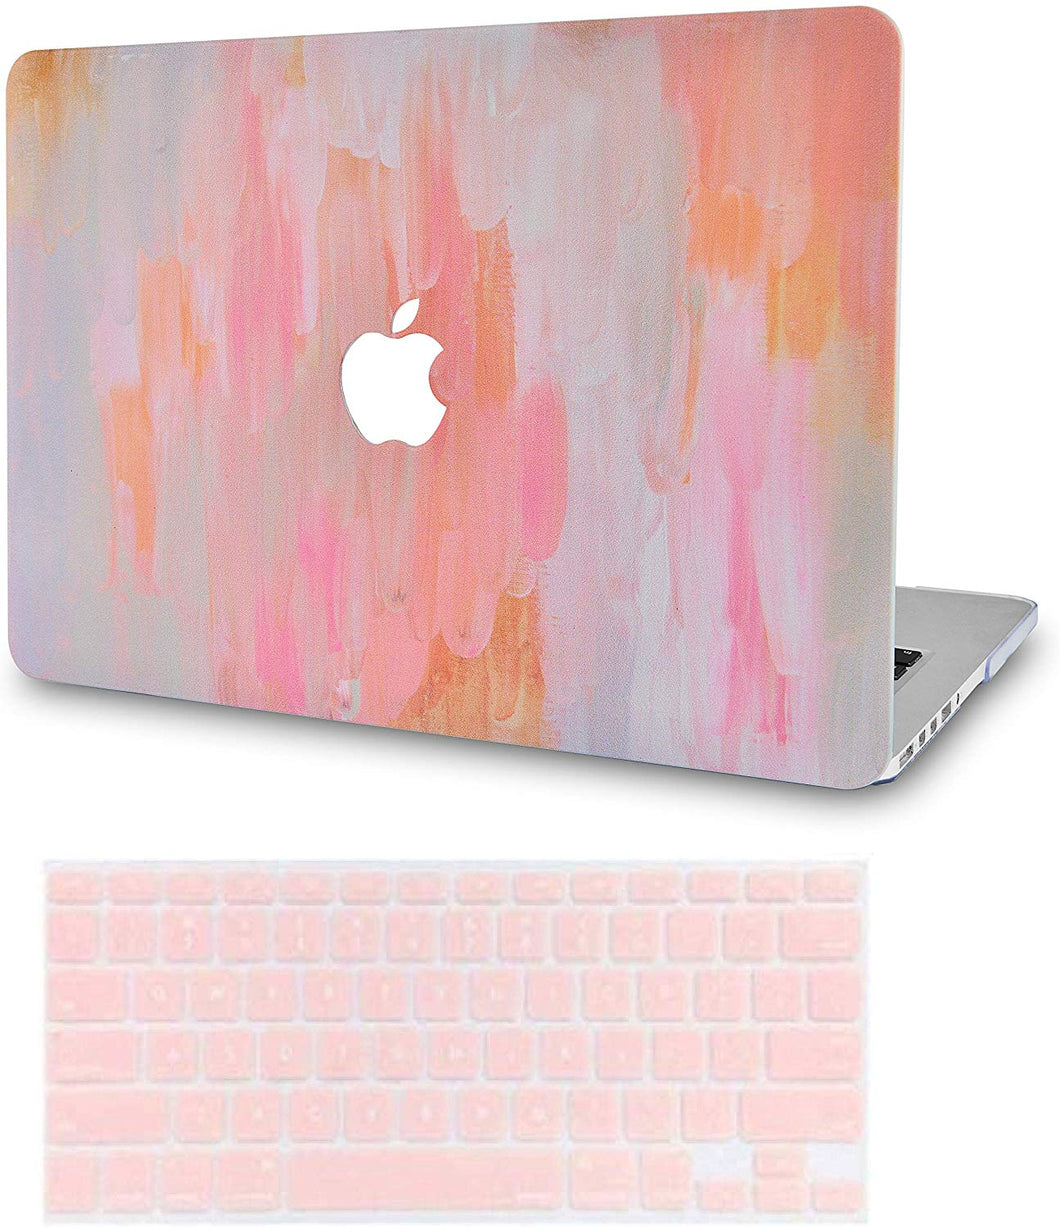 LuvCase Macbook Case Bundle - Paint Collection - Mist 13 with Keyboard Cover